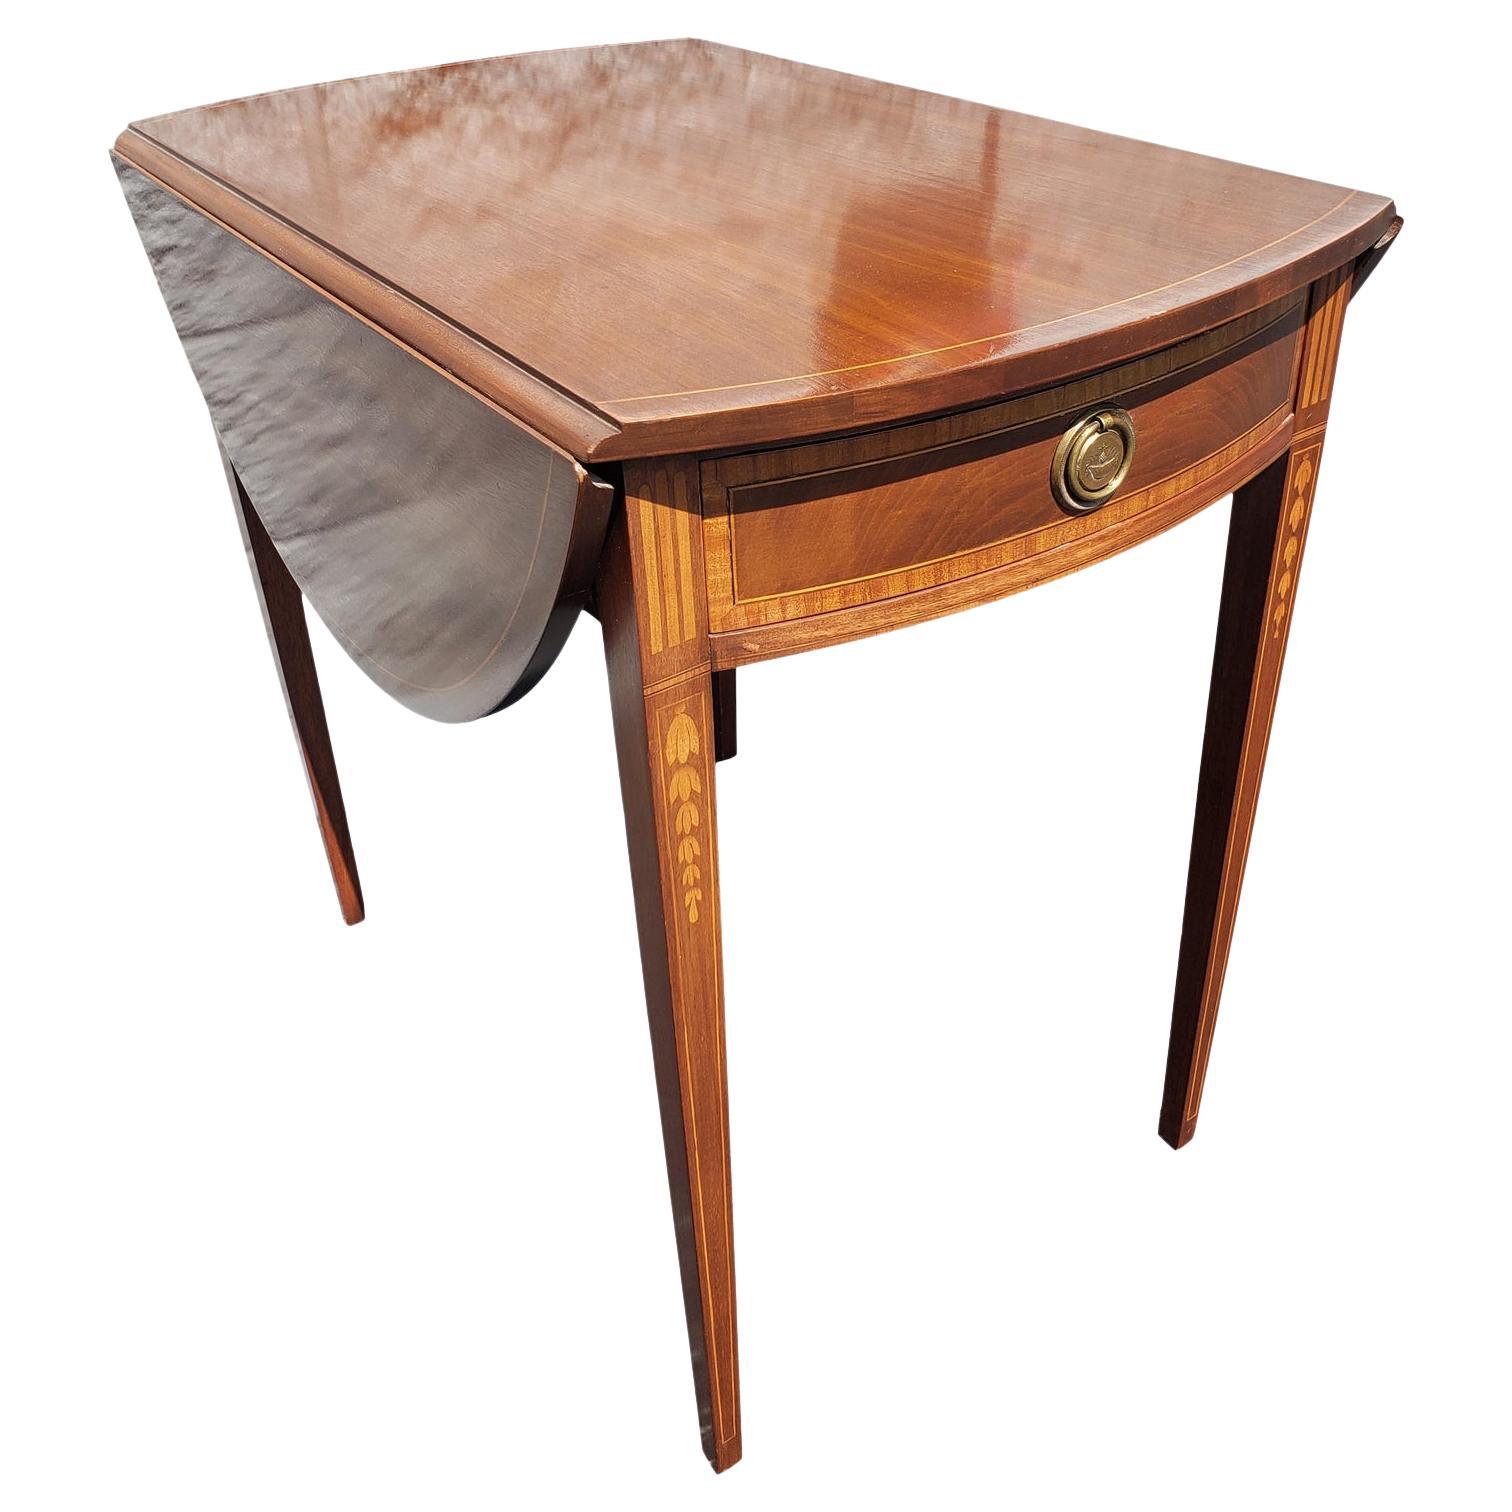 1970s Chippendale Inlaid Mahogany and Satin Wood Drop Leaf Pembroke Table